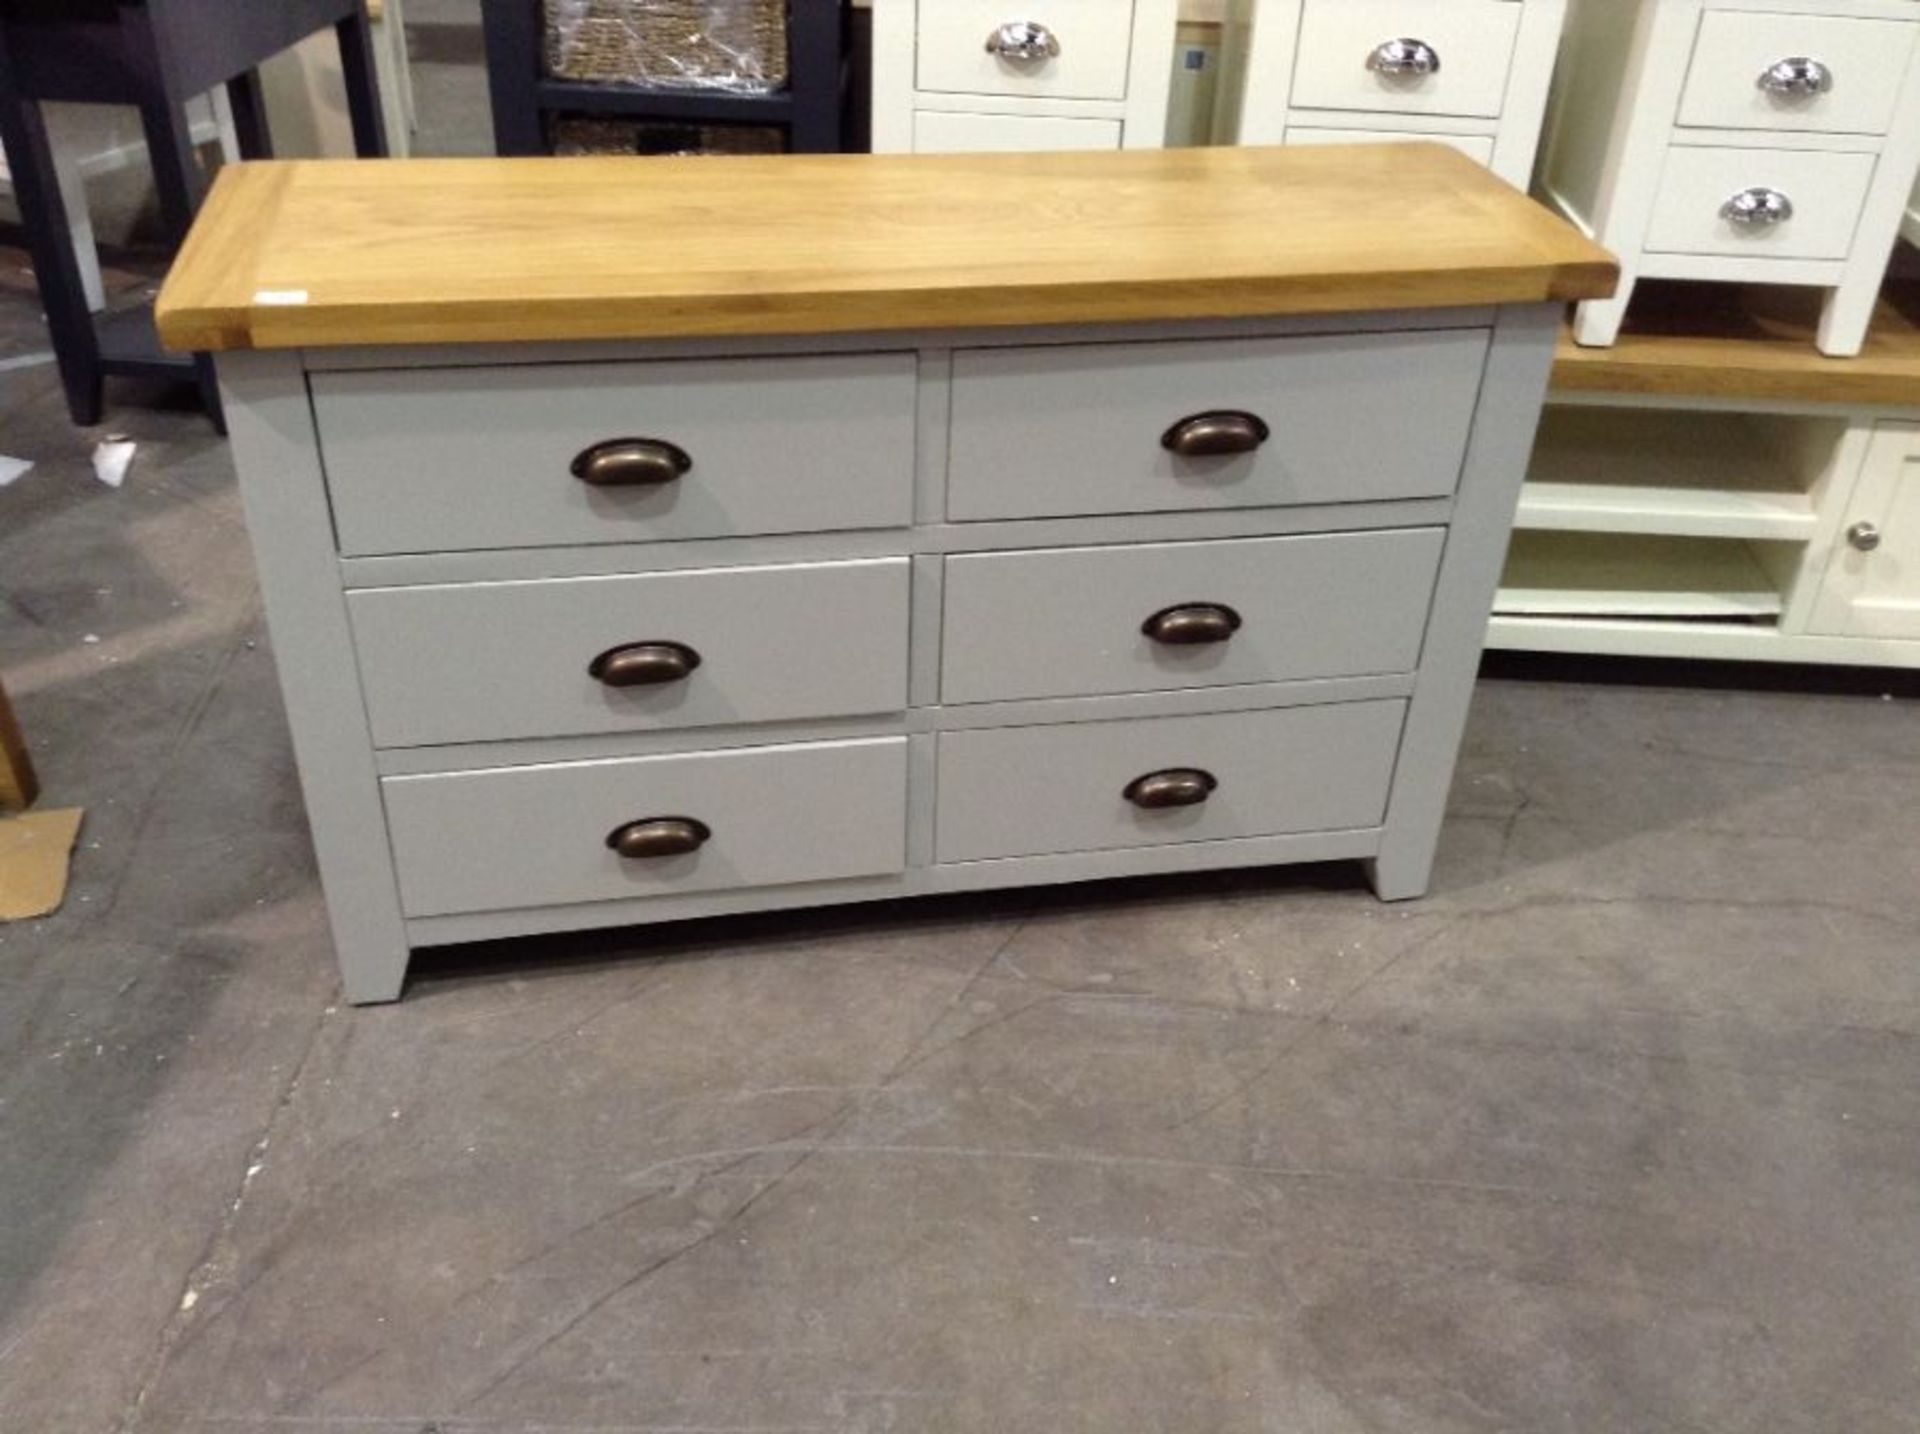 HAMPSTEAD GREYPAINTED OAK 6 DRAWER CHEST